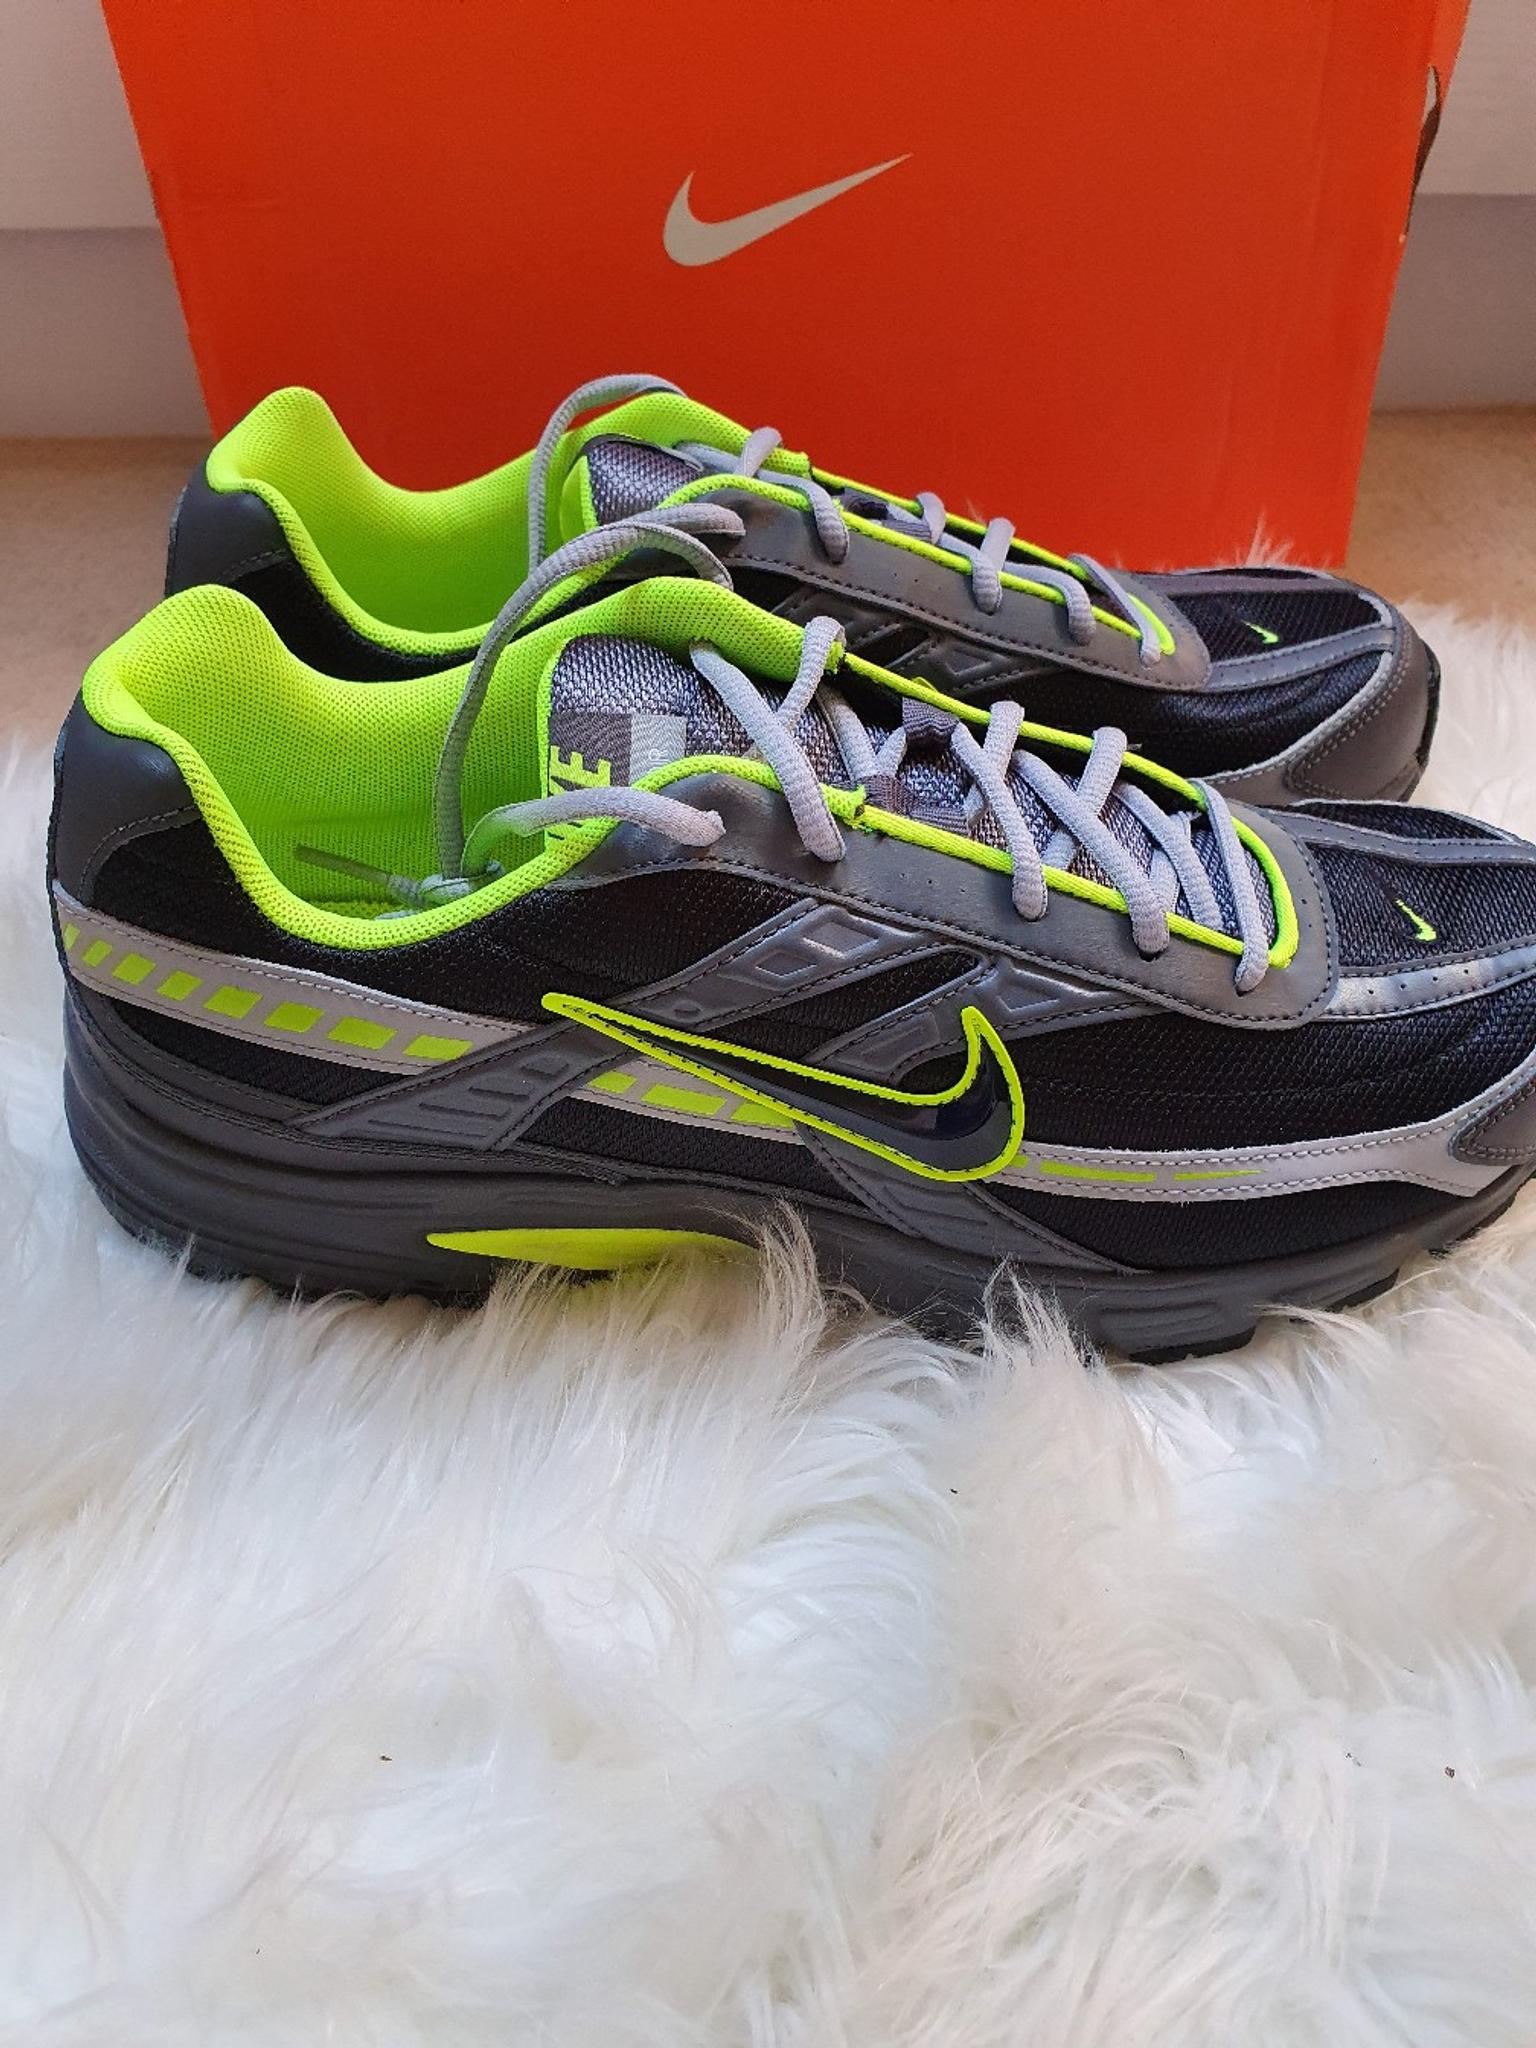 mens trainers size 10